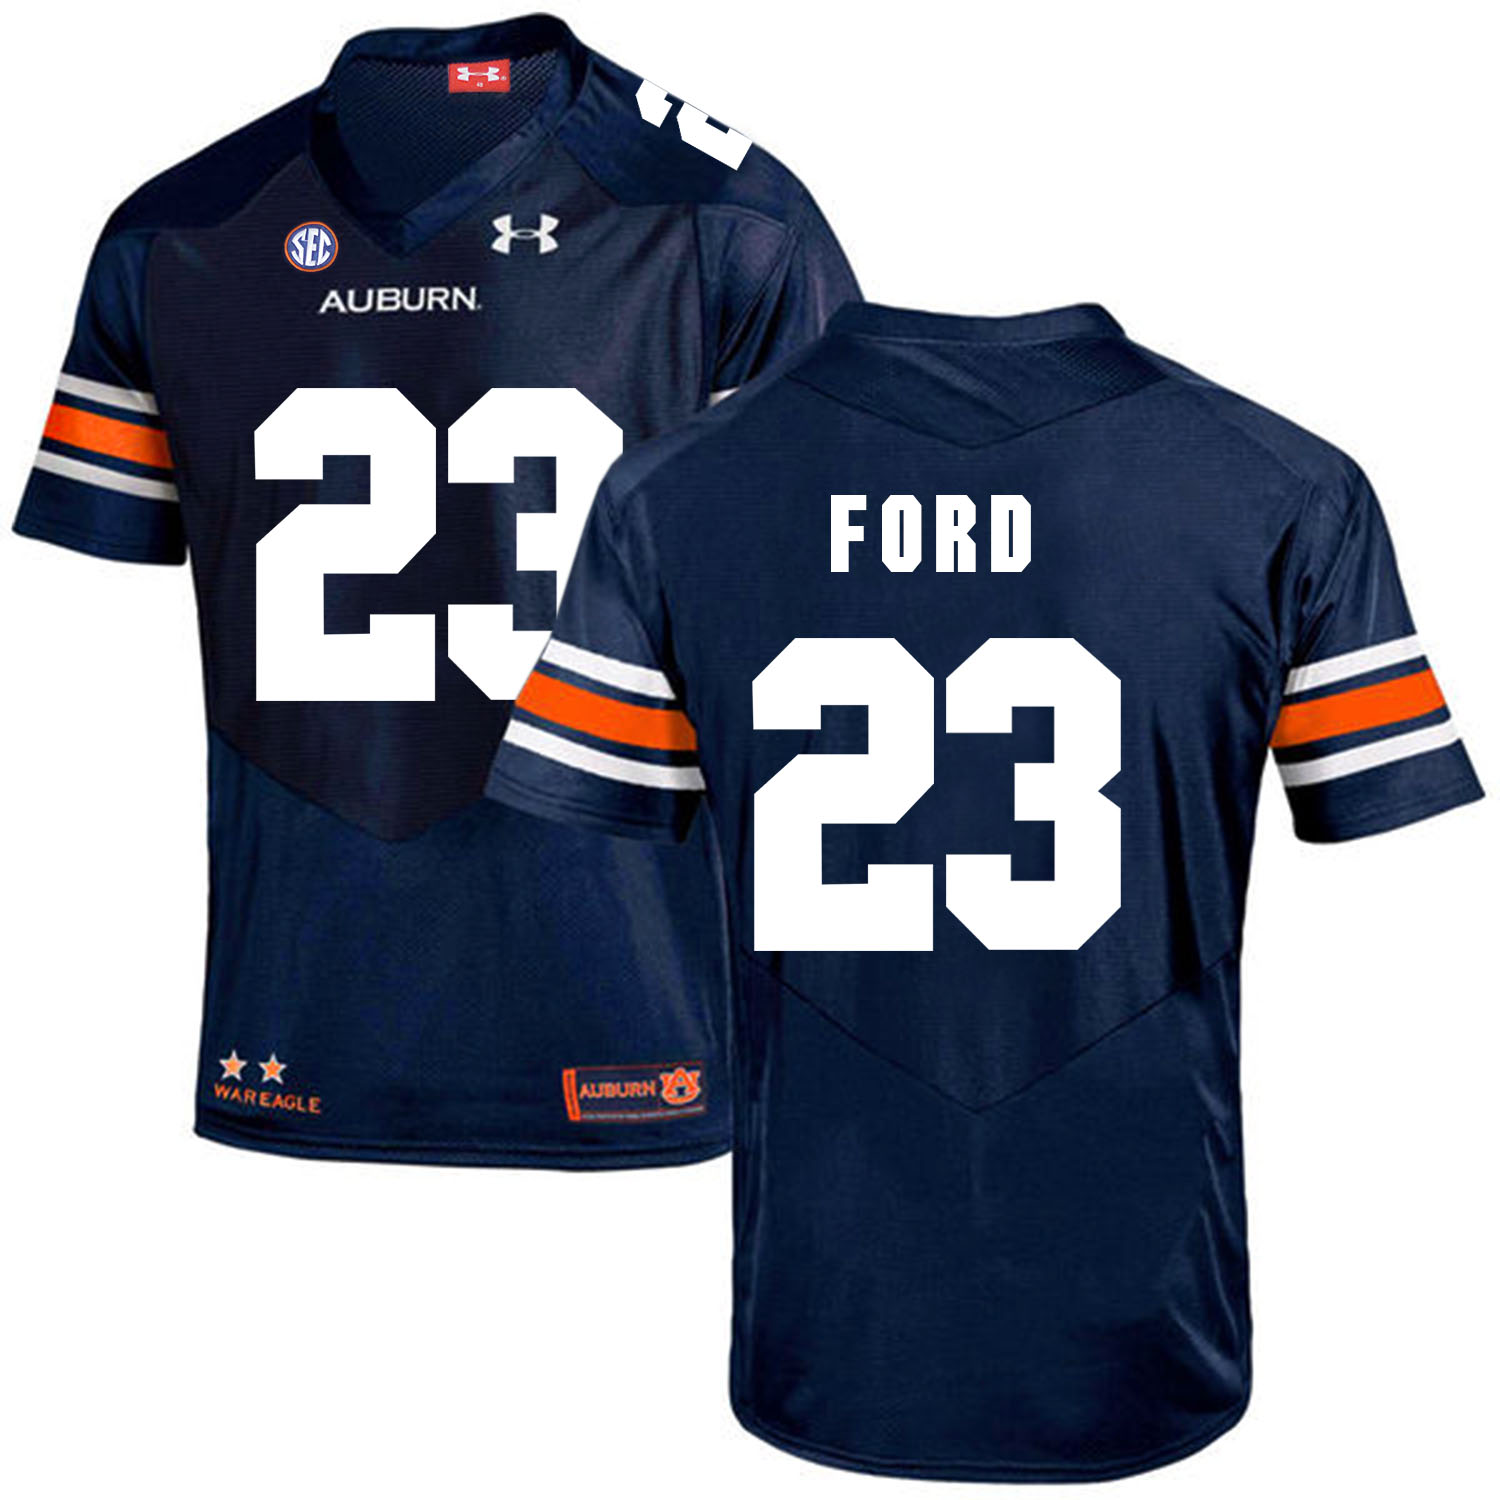 Auburn Tigers 23 Rudy Ford Navy College Football Jersey